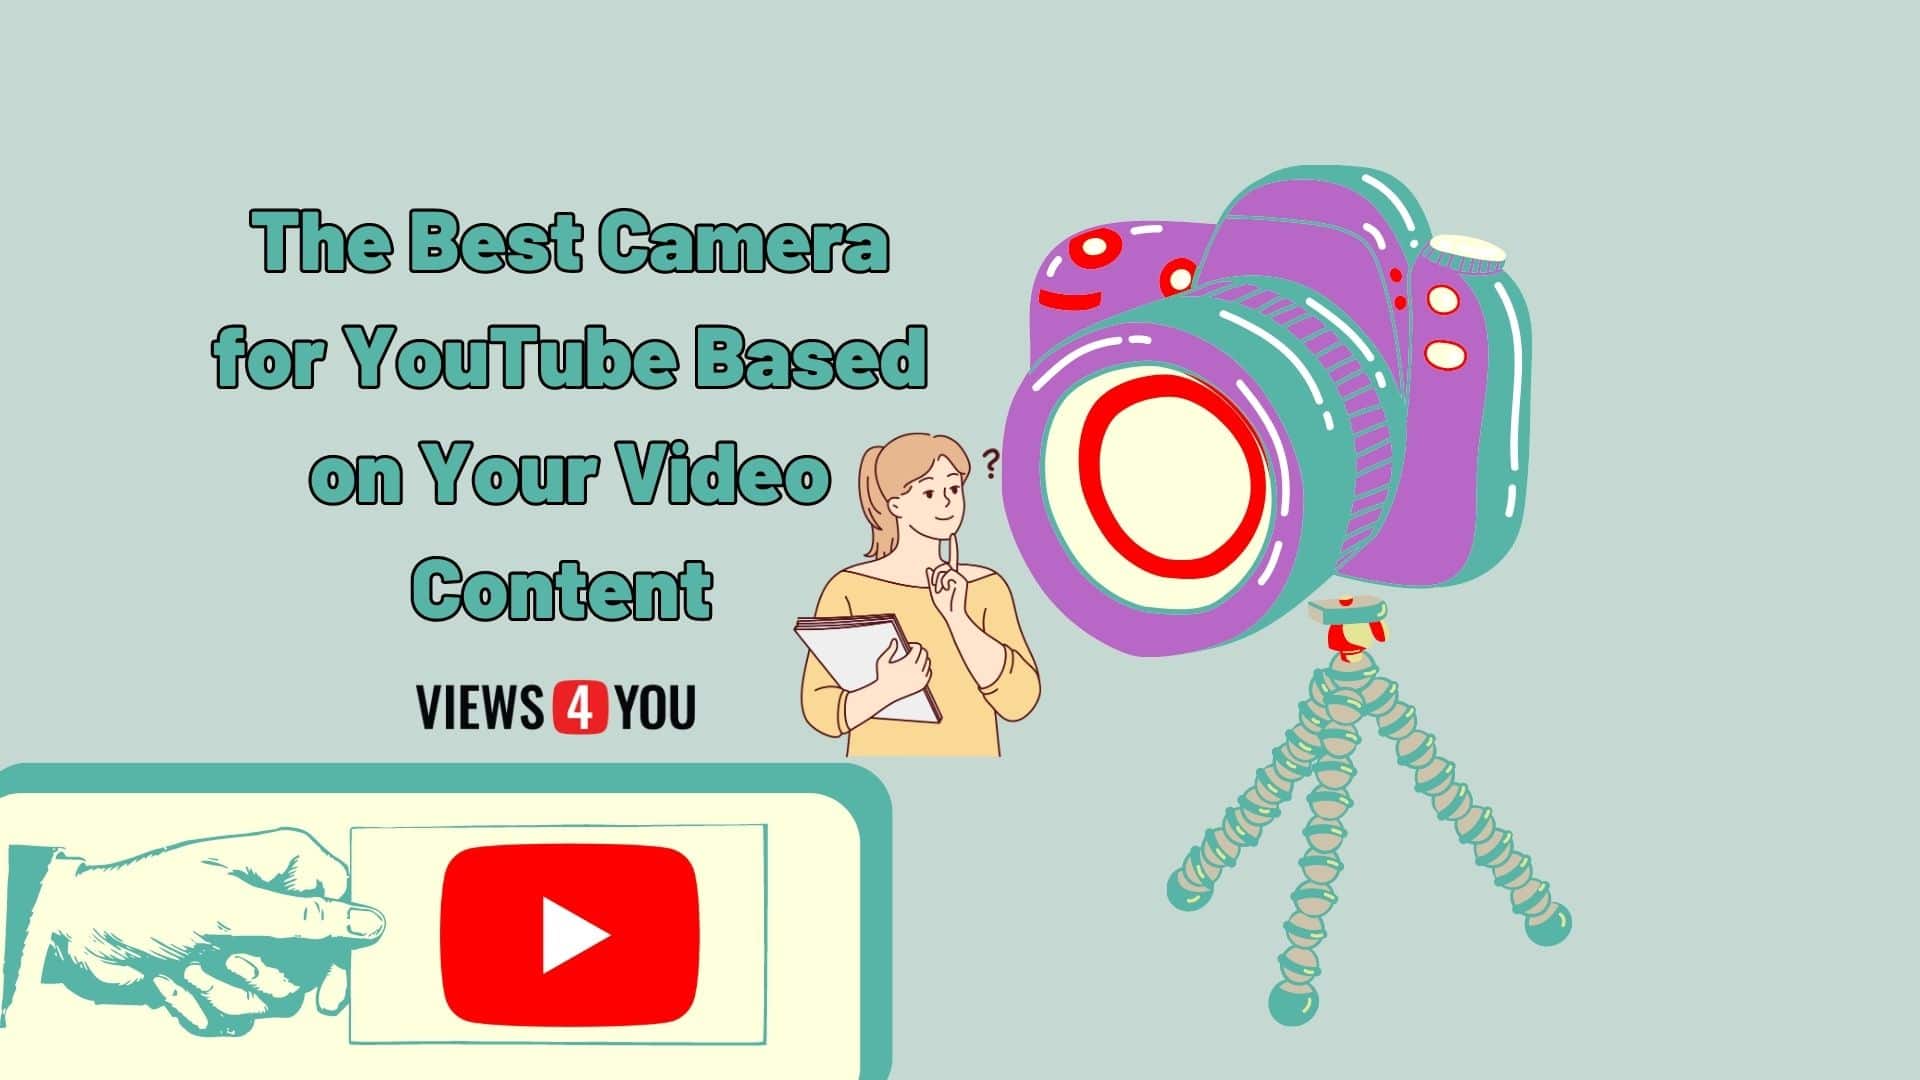 The best cameras for YouTube content.